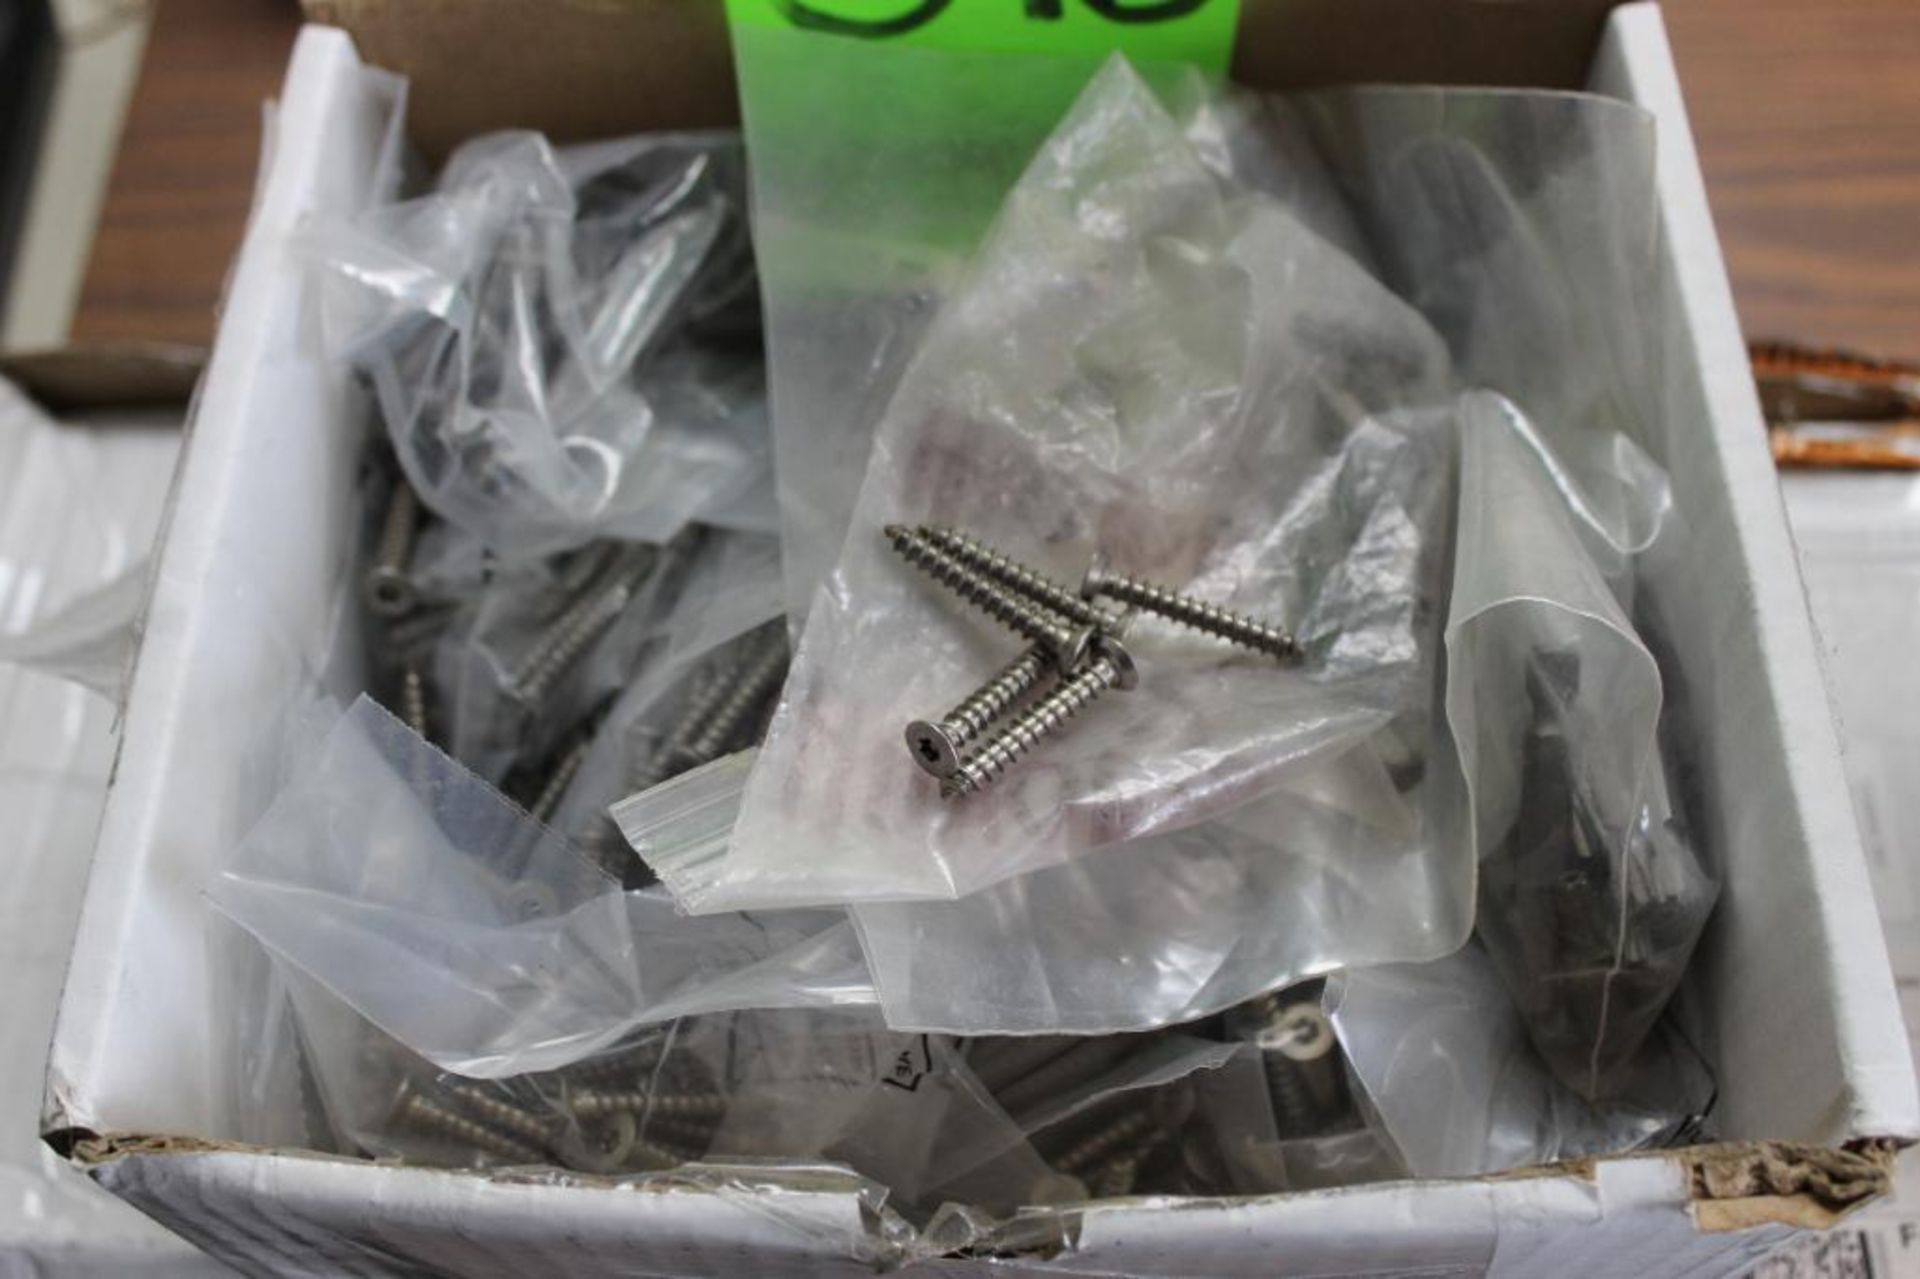 Lot of (4) Boxes of Hinge Screws and Self Tappers - Image 2 of 3